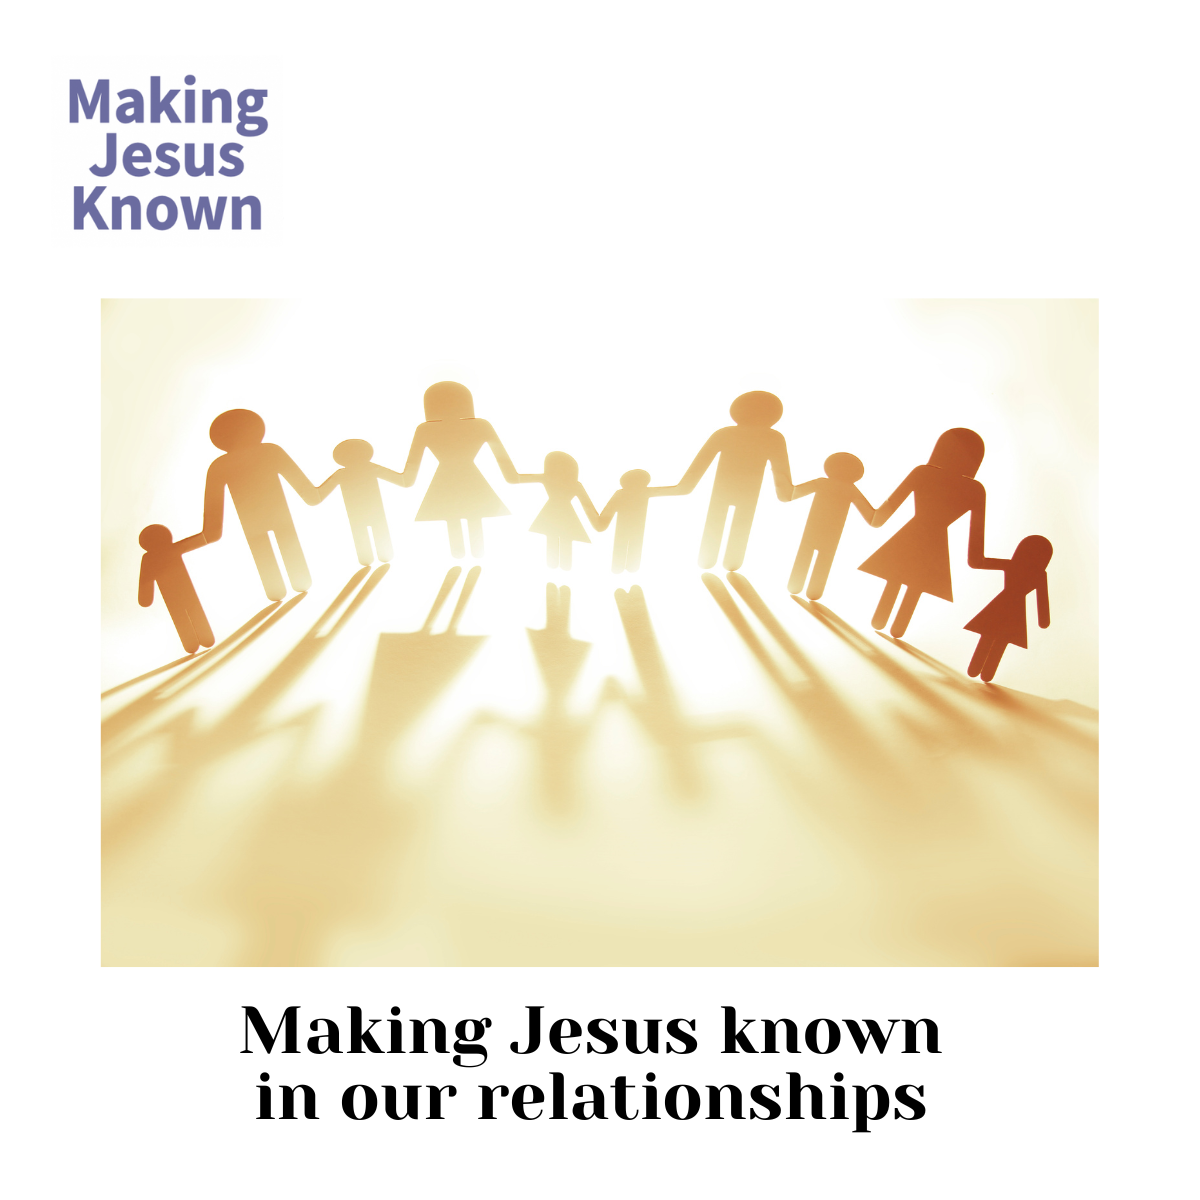 Making Jesus Known in our Relationships